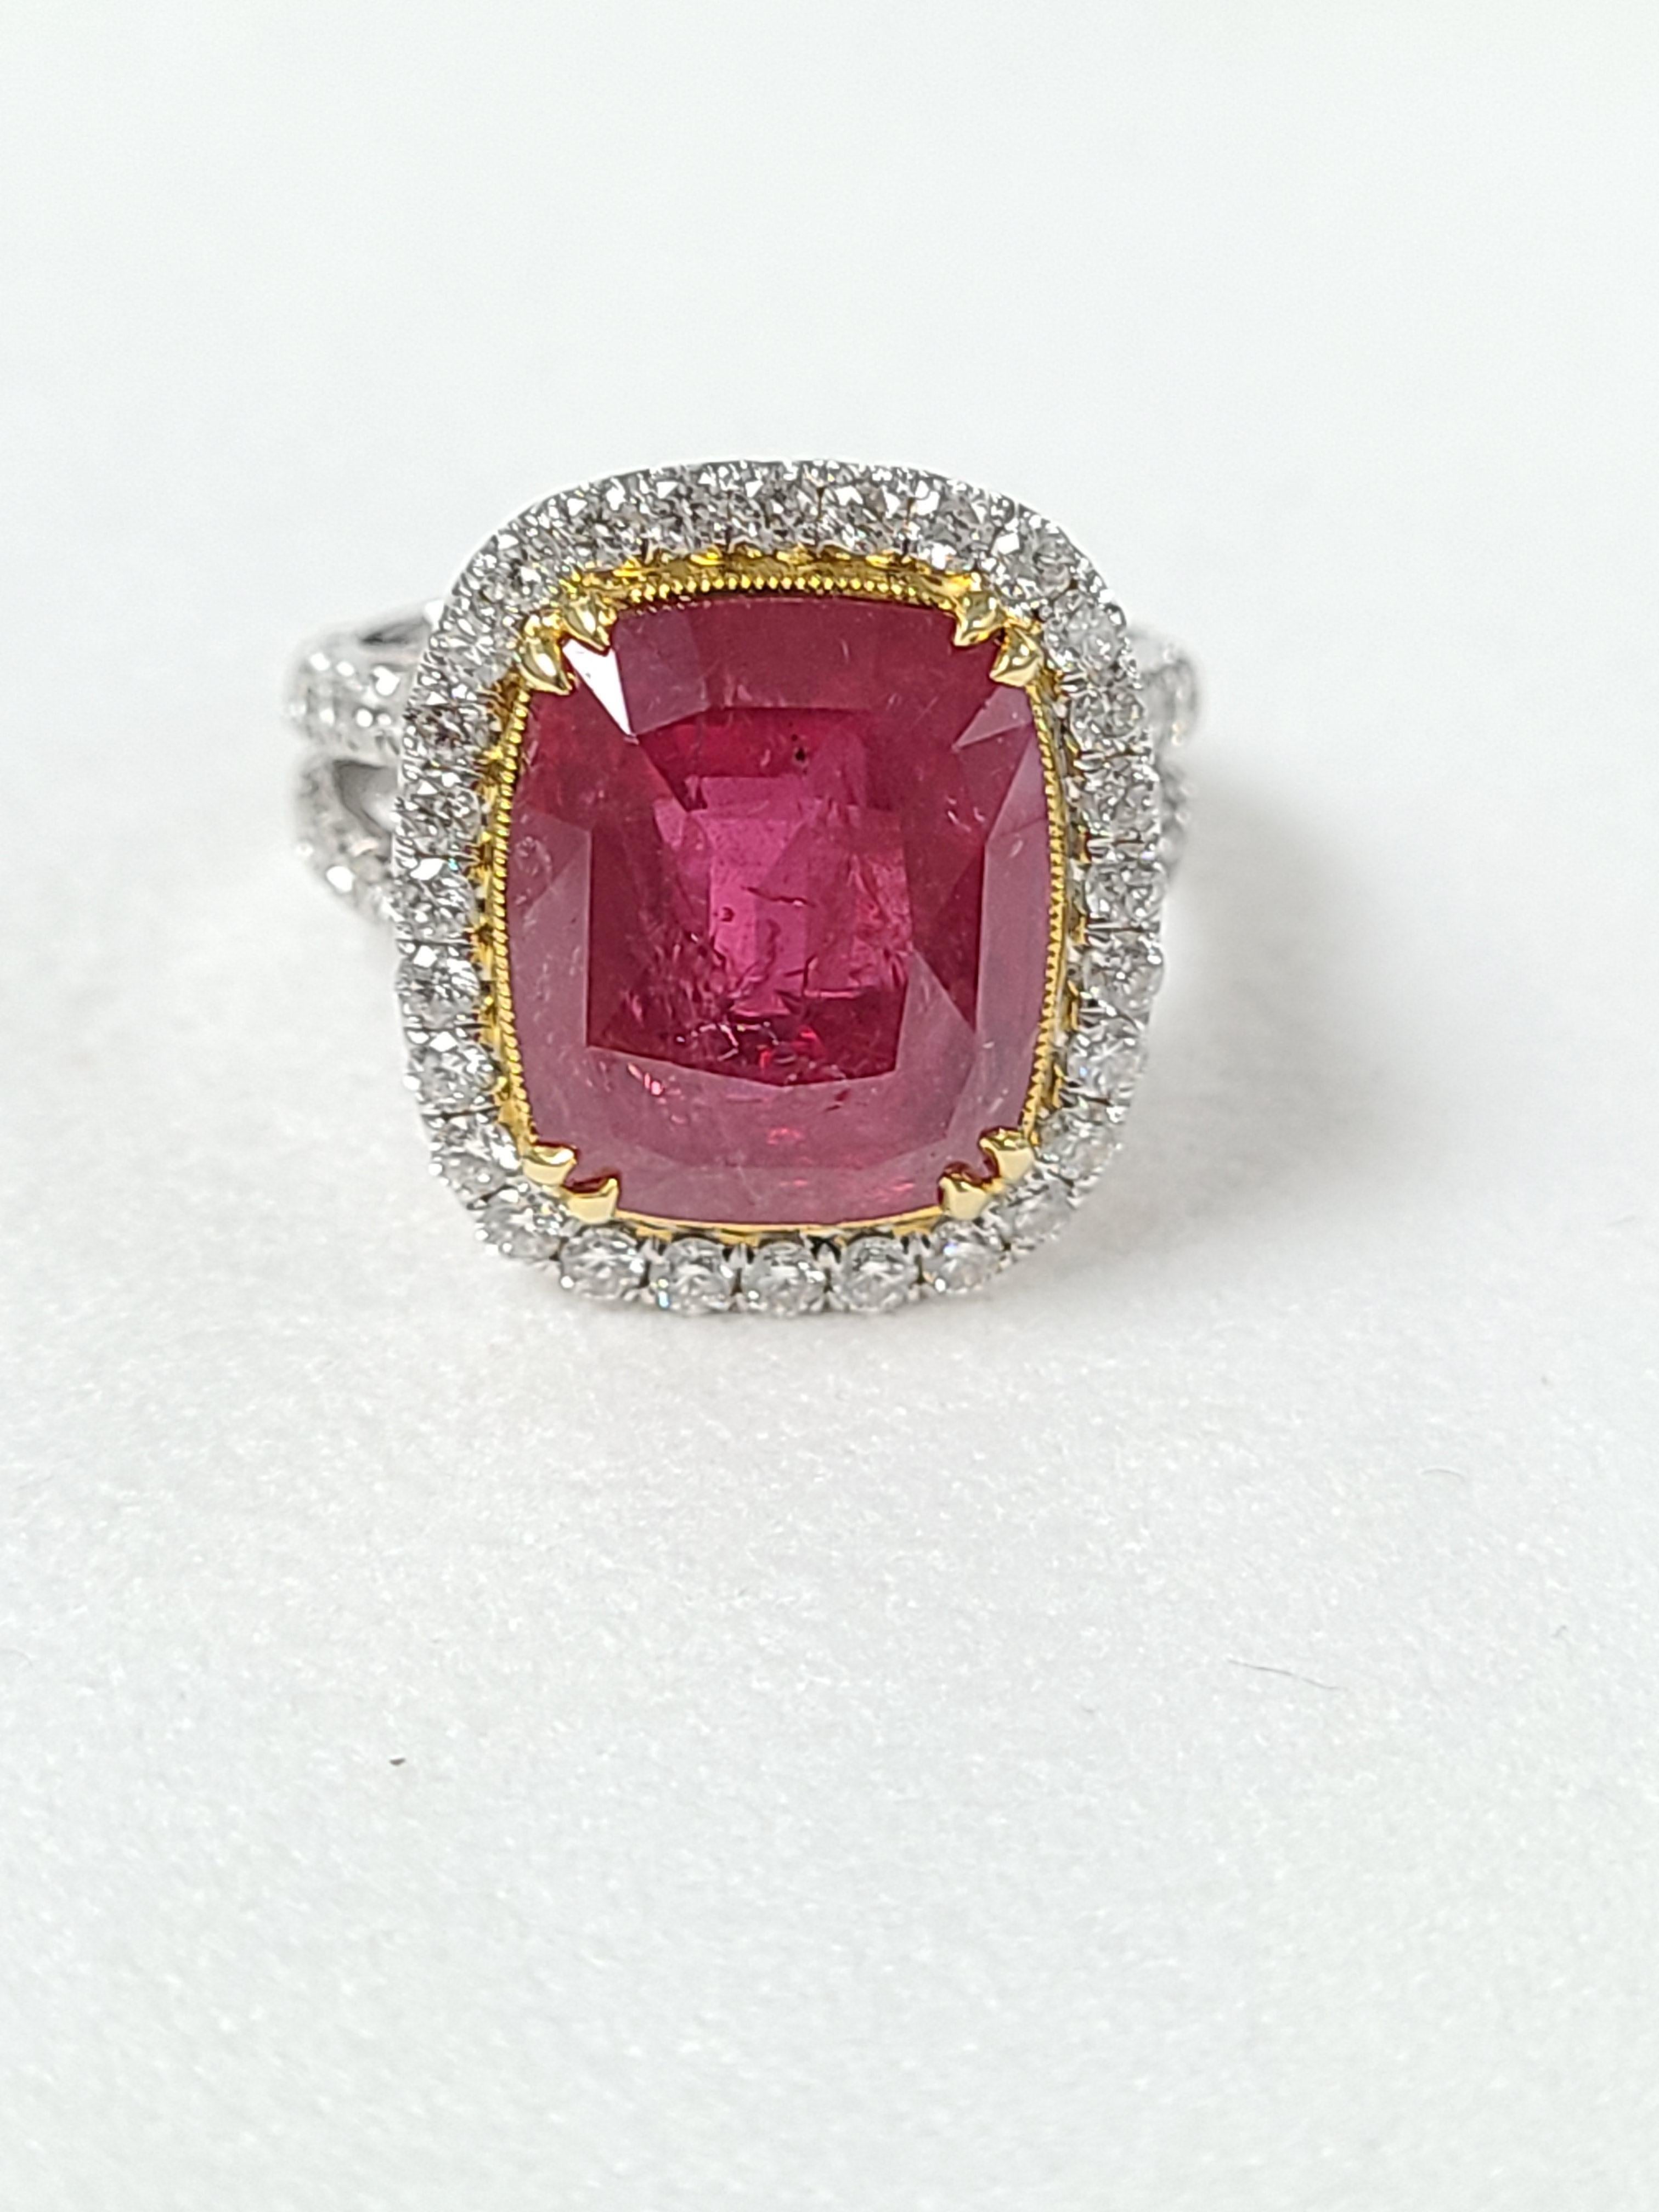 A gorgeous and elegant No Heat Natural ruby ring set in 18k gold . The ruby weight is 9.45 carats and is GIA certified . The ring dimensions in cm 1.5 x 1.2 x 2.6 (L X W X H) . US size 6 1/2.